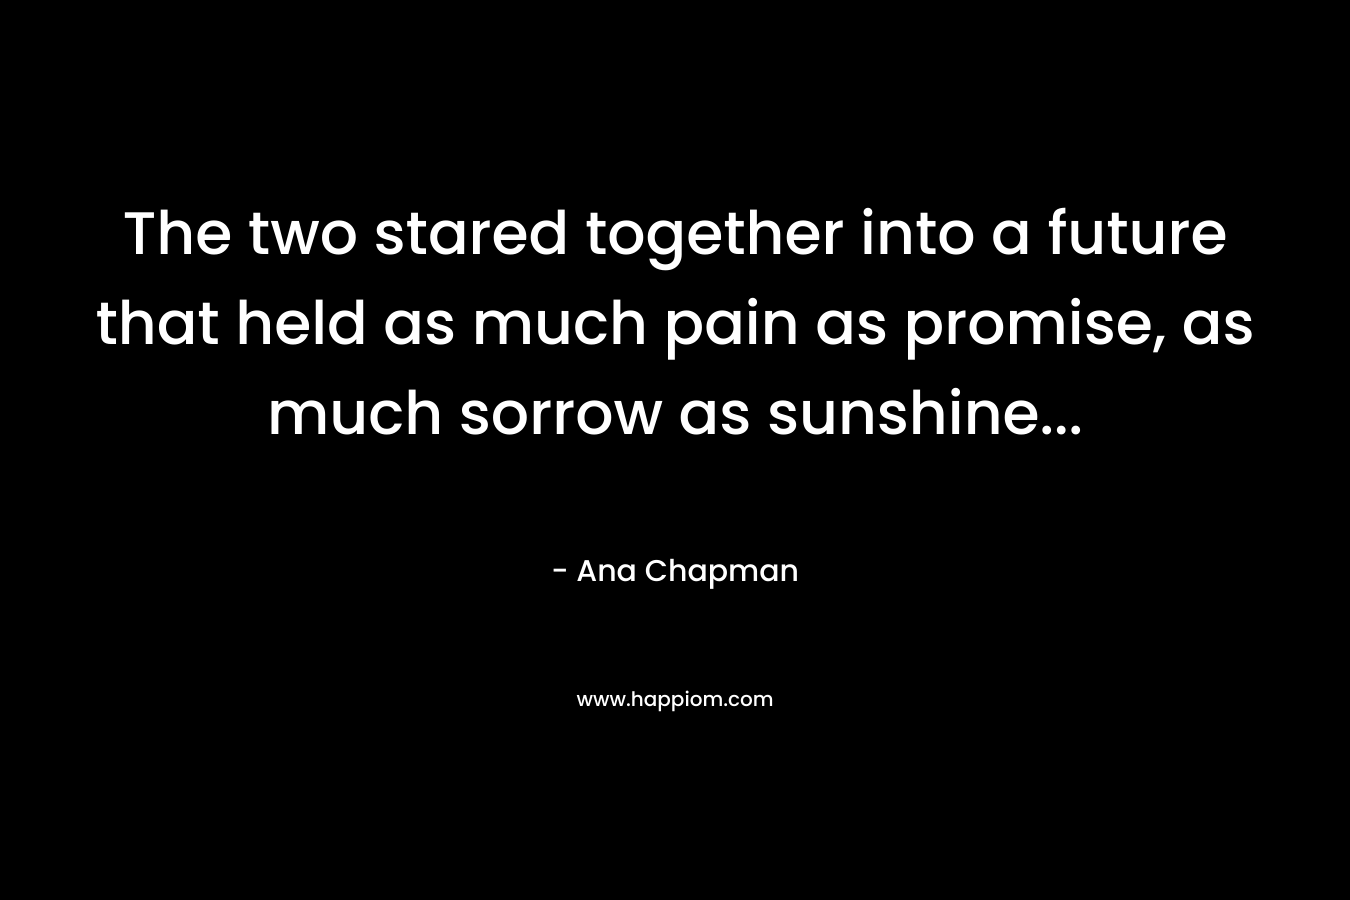 The two stared together into a future that held as much pain as promise, as much sorrow as sunshine...